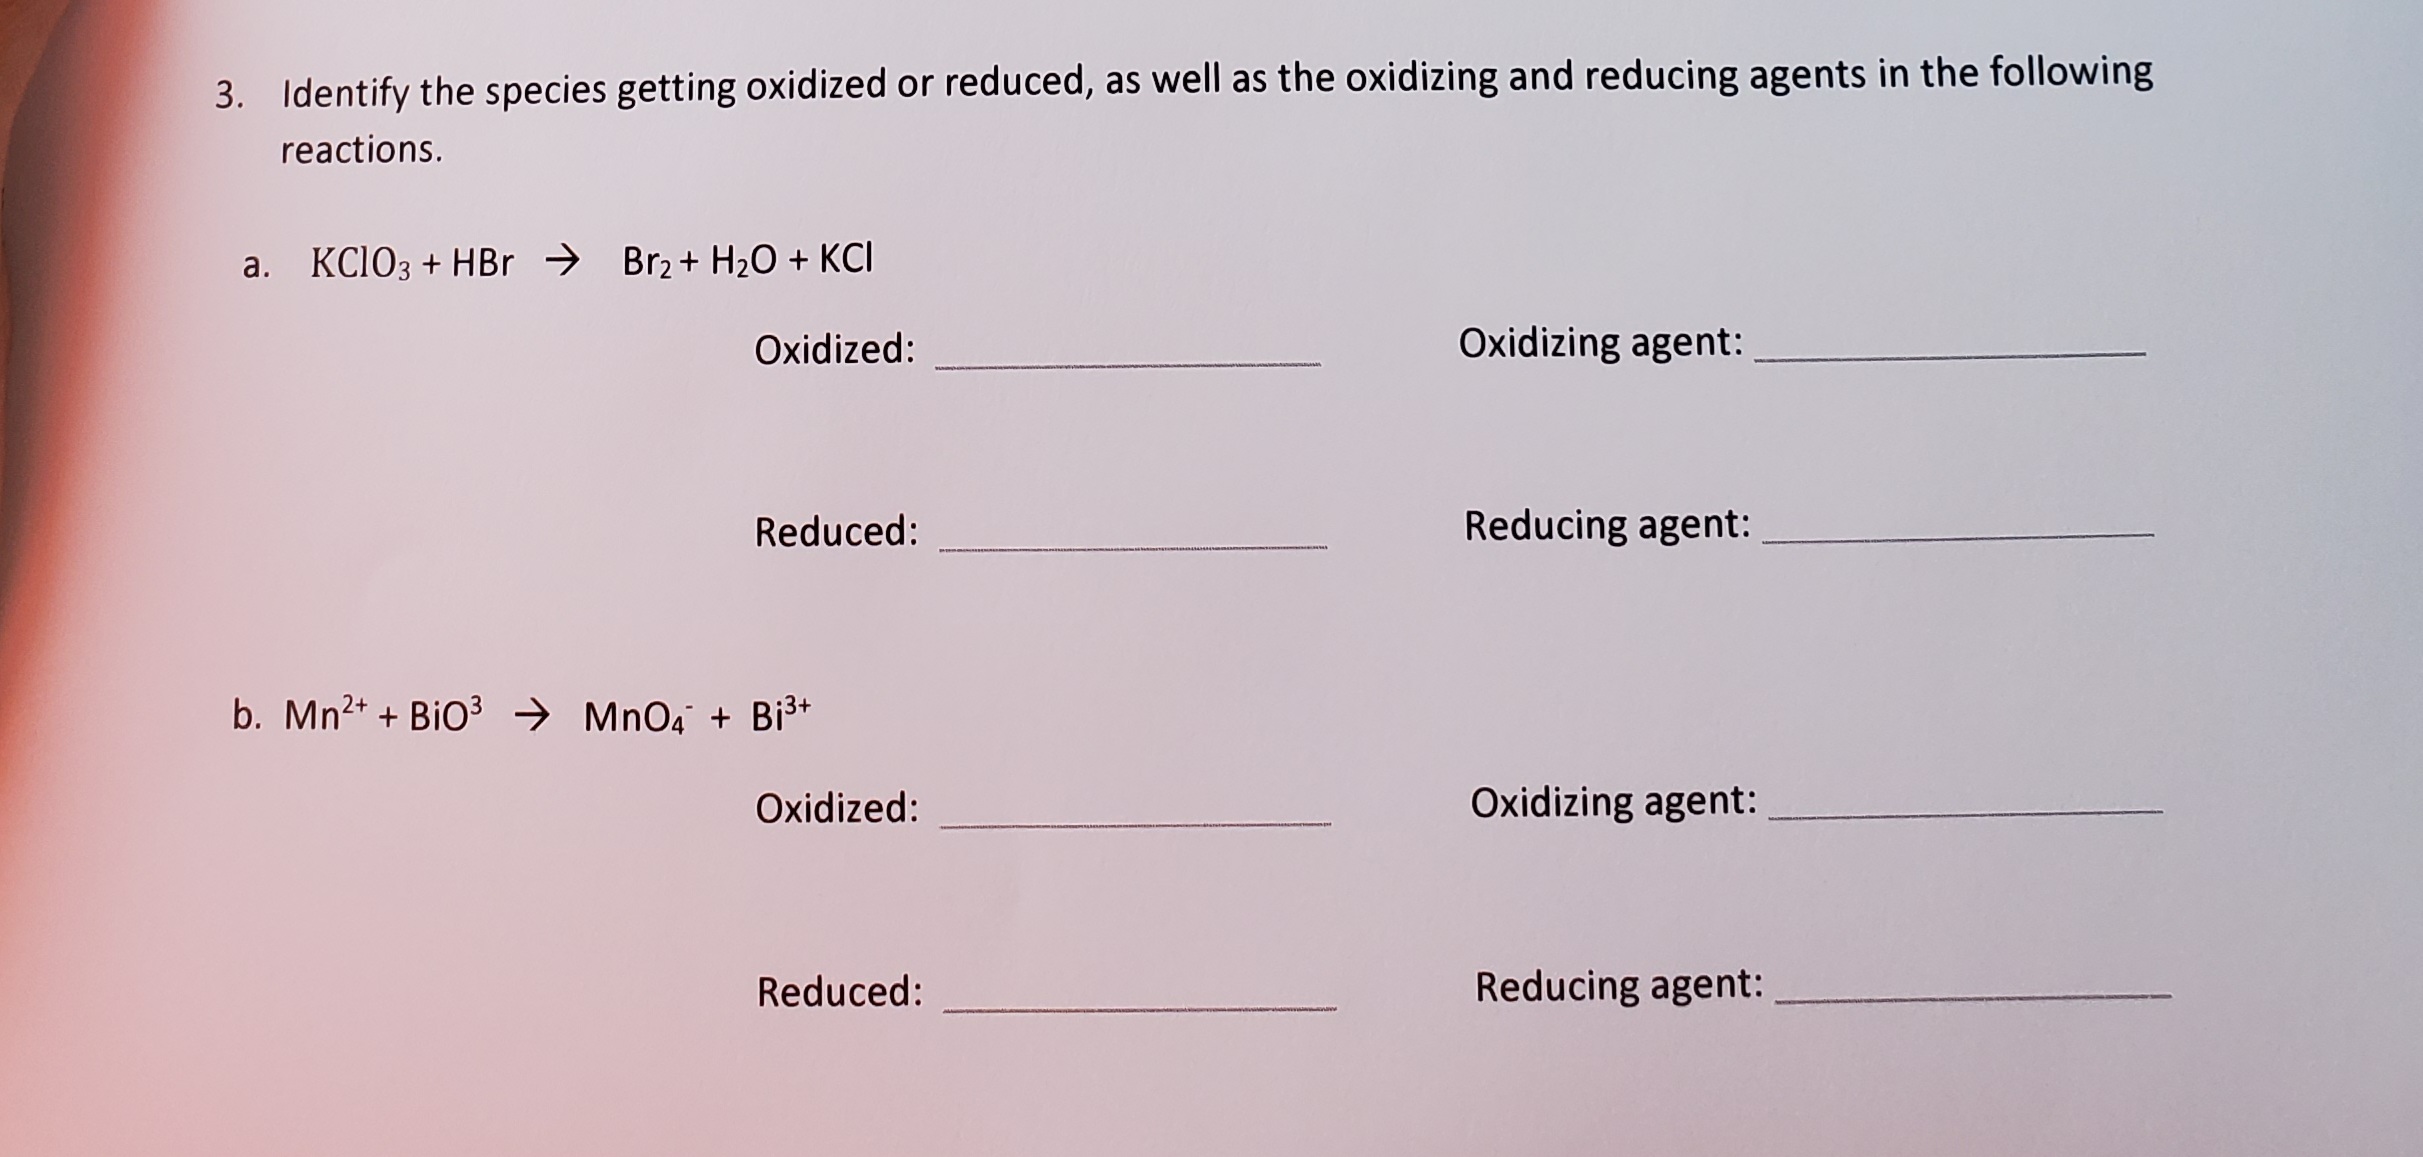 3. Identify the species getting oxidized or reduced, as well as the oxidizing and reducing agents in the following
reactions.
a. KC103 + HBr → Br2+ H2O + KCI
Oxidized:
Oxidizing agent:
Reduced:
Reducing agent:
b. Mn2+ + BiO3 → MnO4 + Bi3*
Oxidized:
Oxidizing agent:
Reduced:
Reducing agent:
